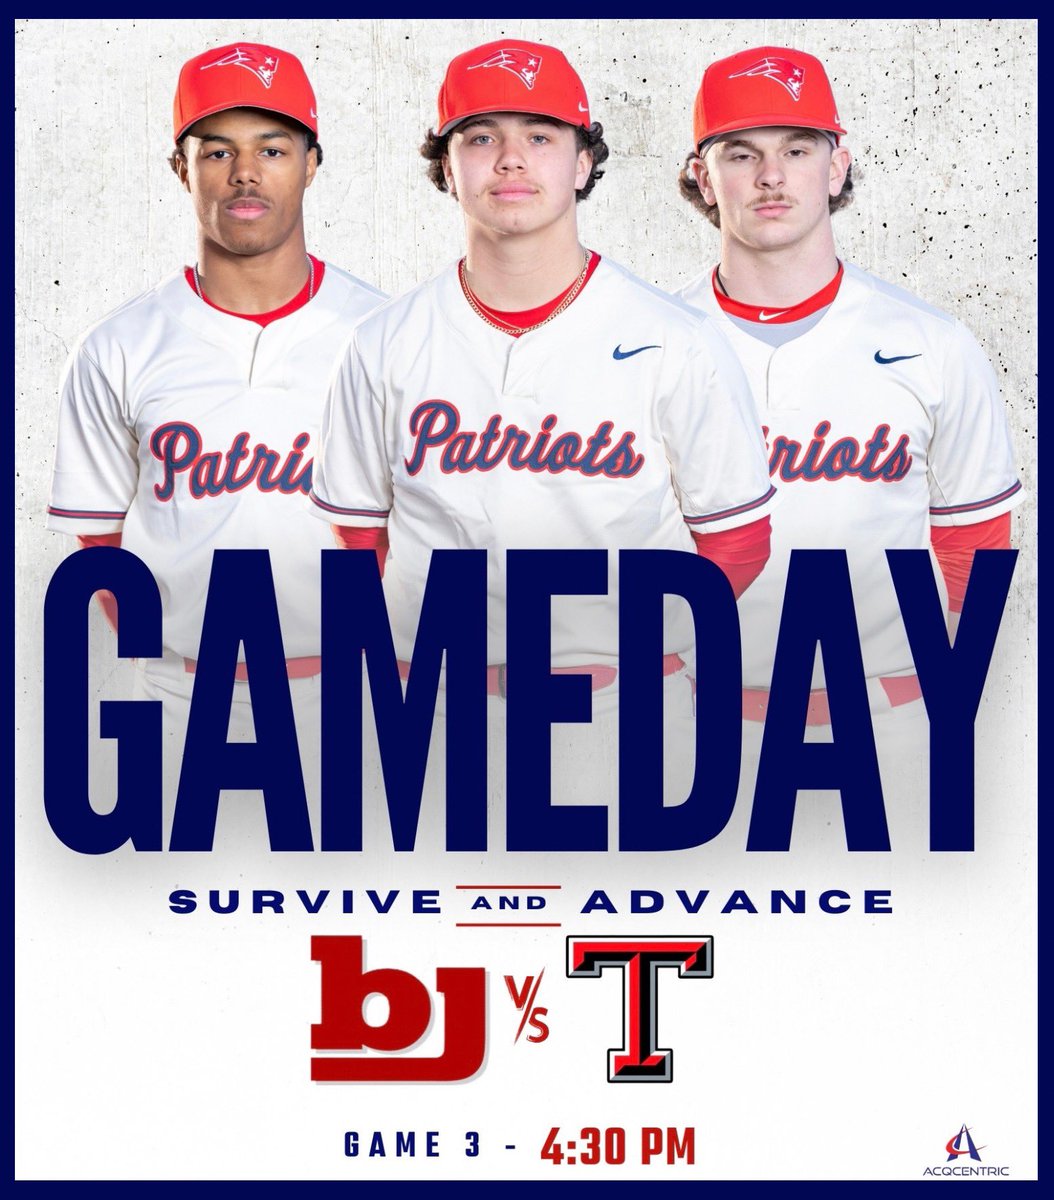 PLAYOFF GAMEDAY!!!! Here we go again!!! Survive and advance!! One game for a spot in the Final 4! You don’t want to miss this!!! 7A #2 Bob Jones (39-7) 🆚 7A #3 @Thompsonbaseba1 (29-11) 🗓 5/3, Friday ⏰ 4:30 📍Bob Jones High School 🎟️ gofan.co/event/1512208